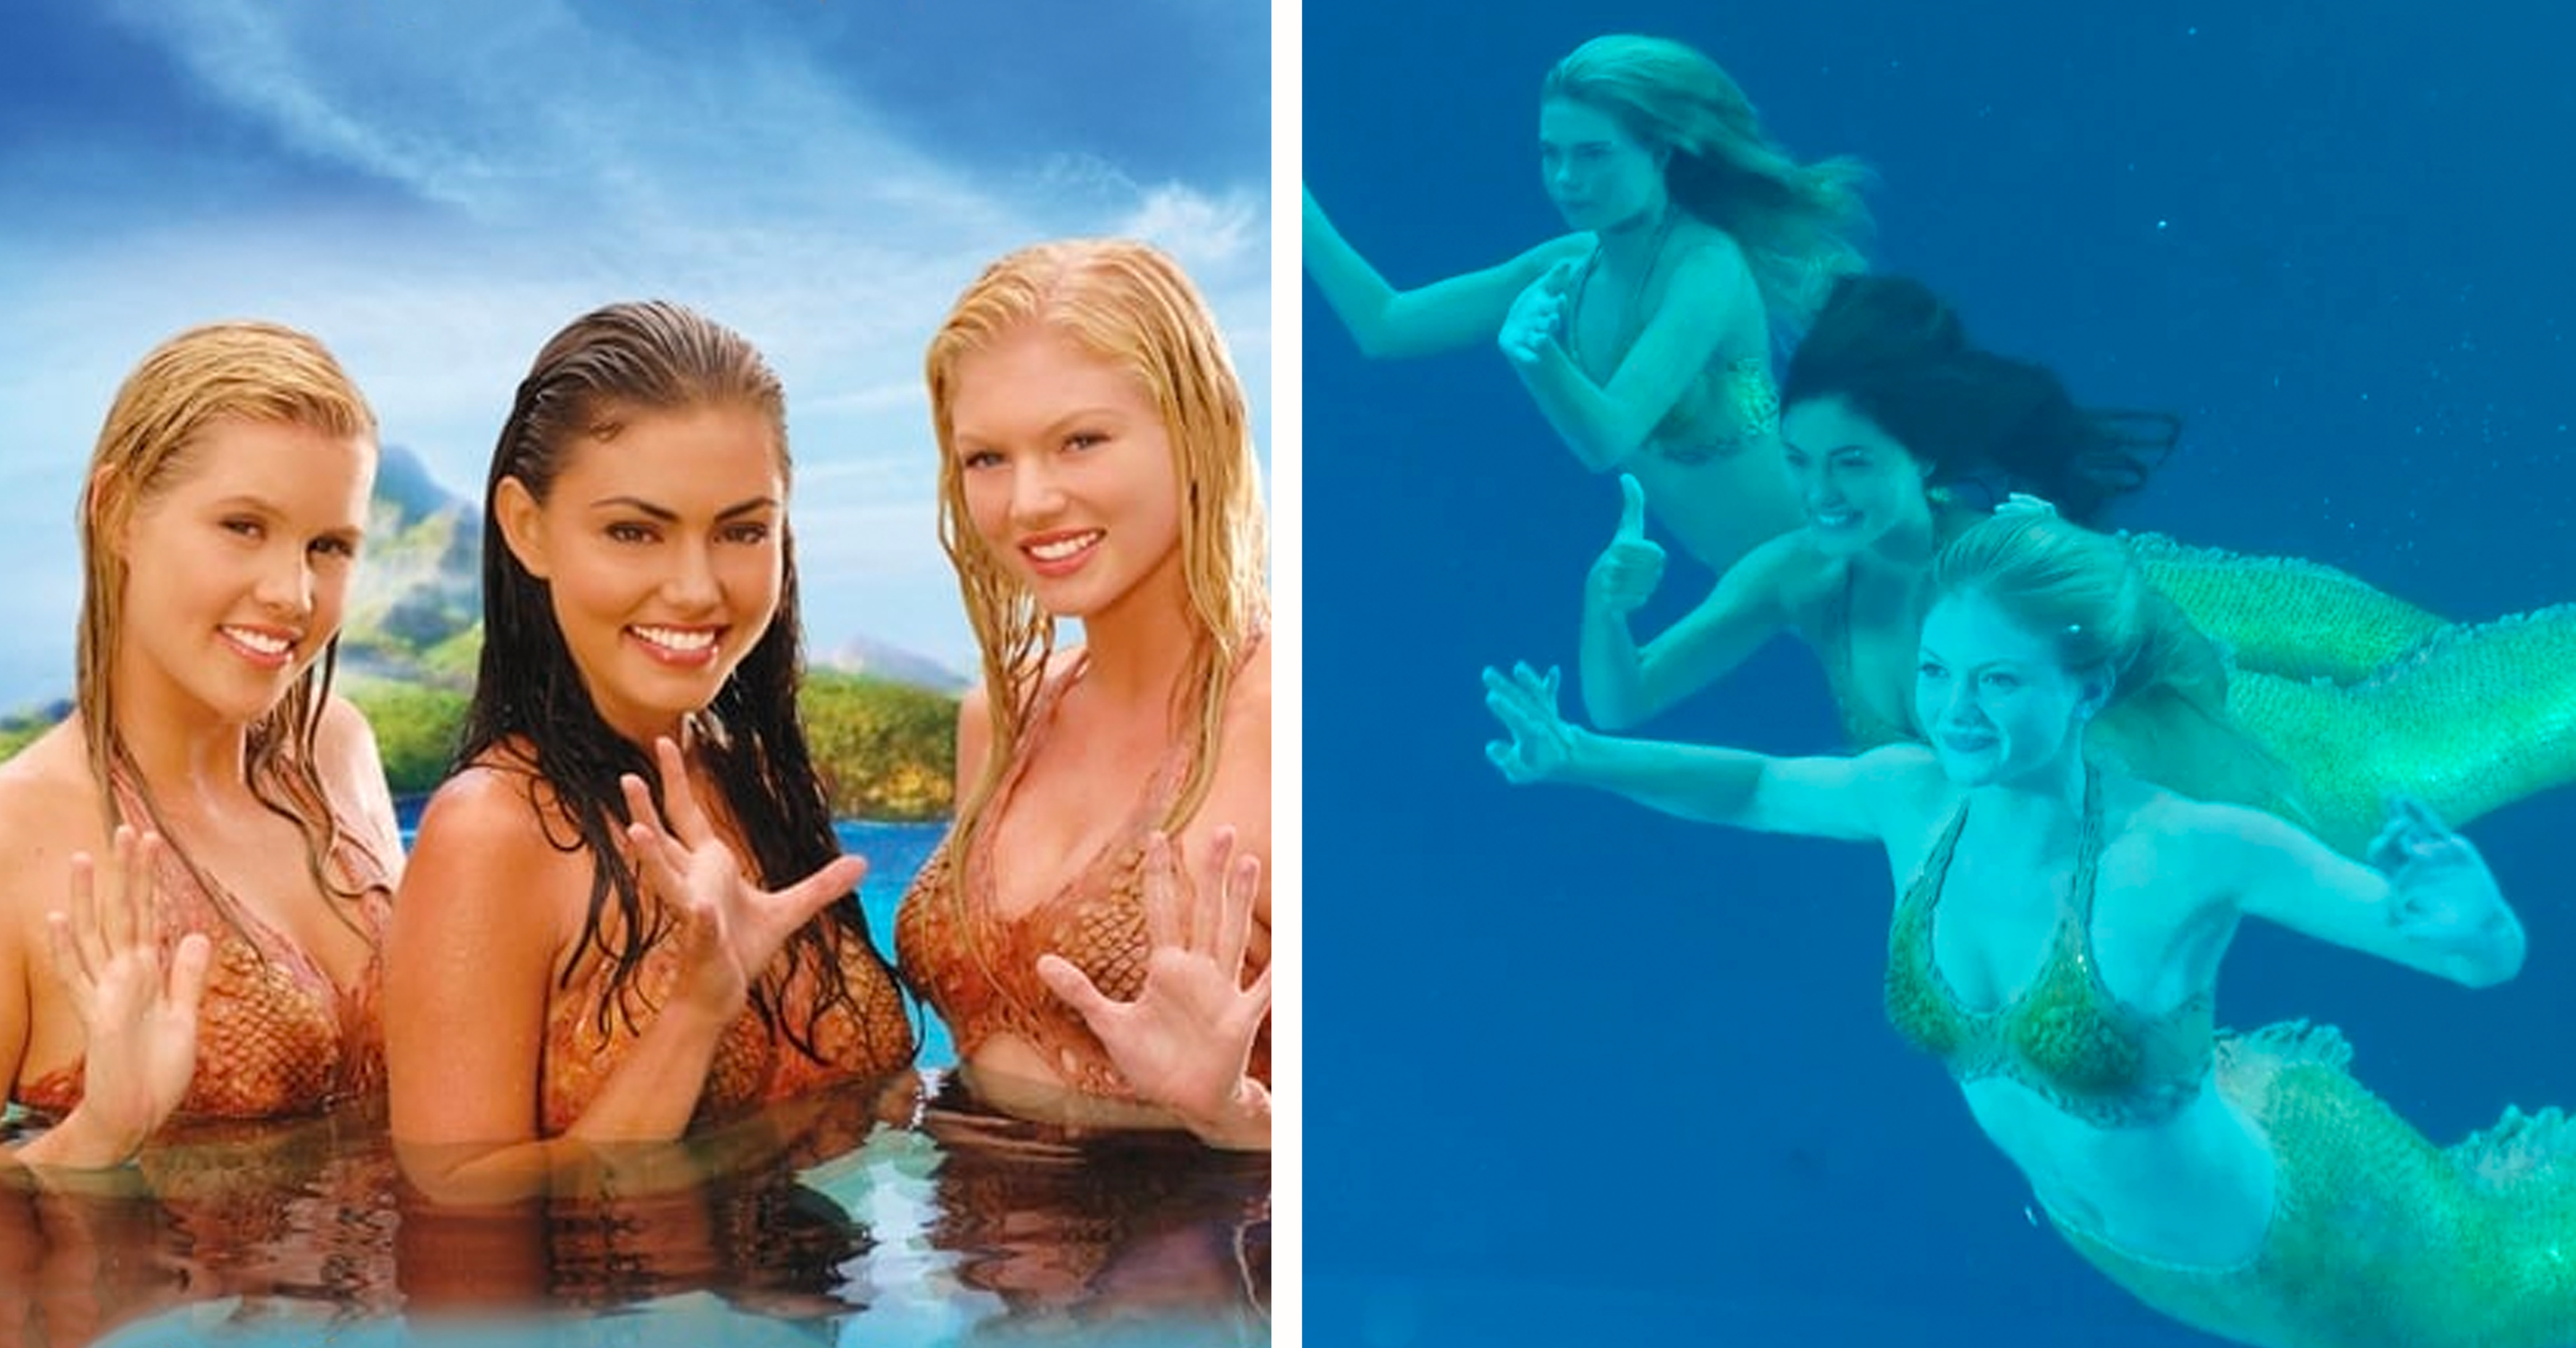 Mako Mermaids I do not own any of these images  Mako mermaids, H2o mermaids,  Mermaid wallpapers